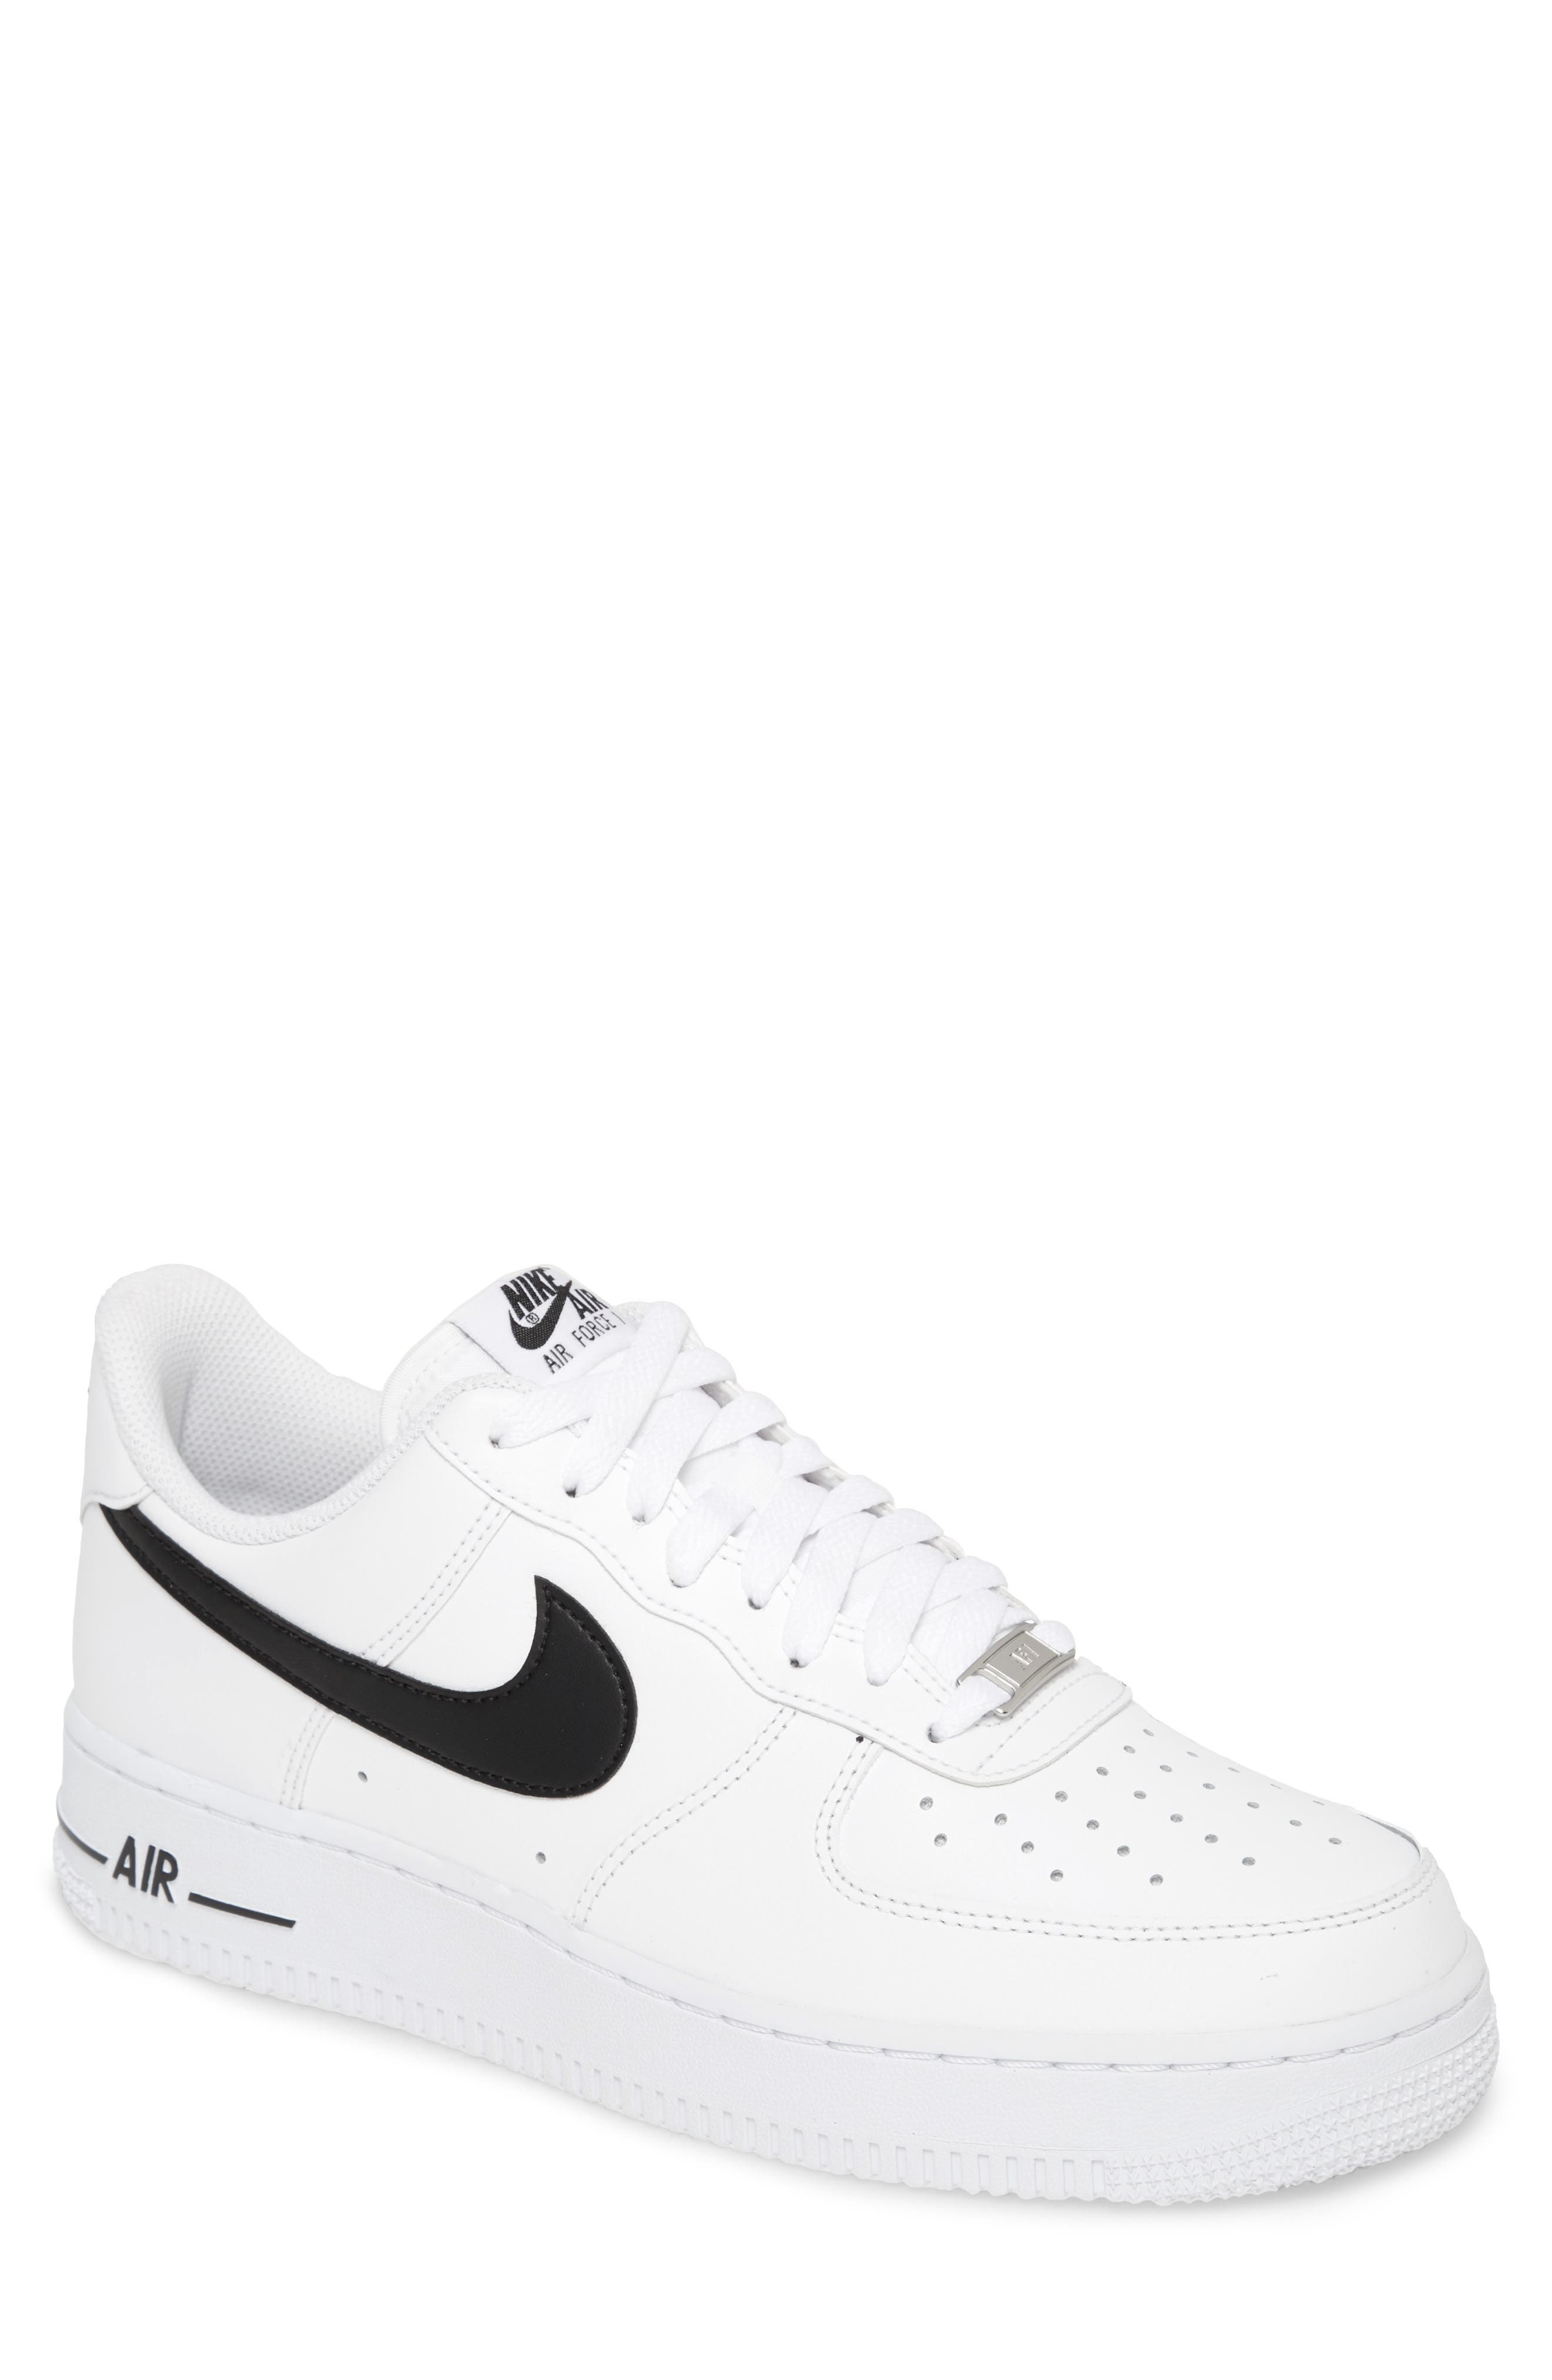 Nike Air Force 1 '07 An20 Sneaker, Size 